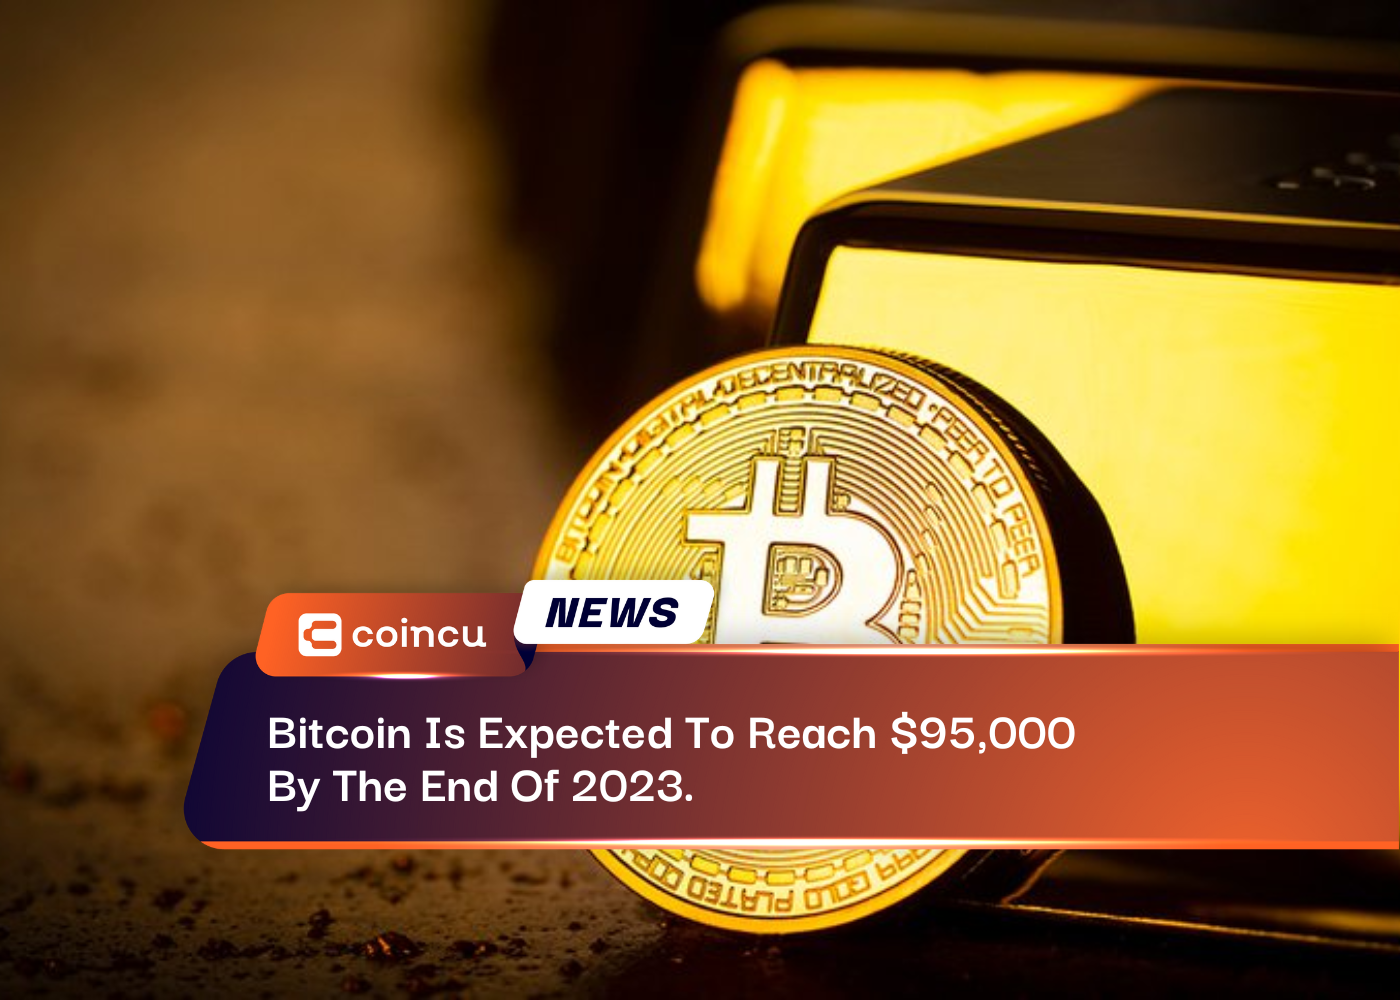 Bitcoin Is Expected To Reach $95,000 By The End Of 2023.